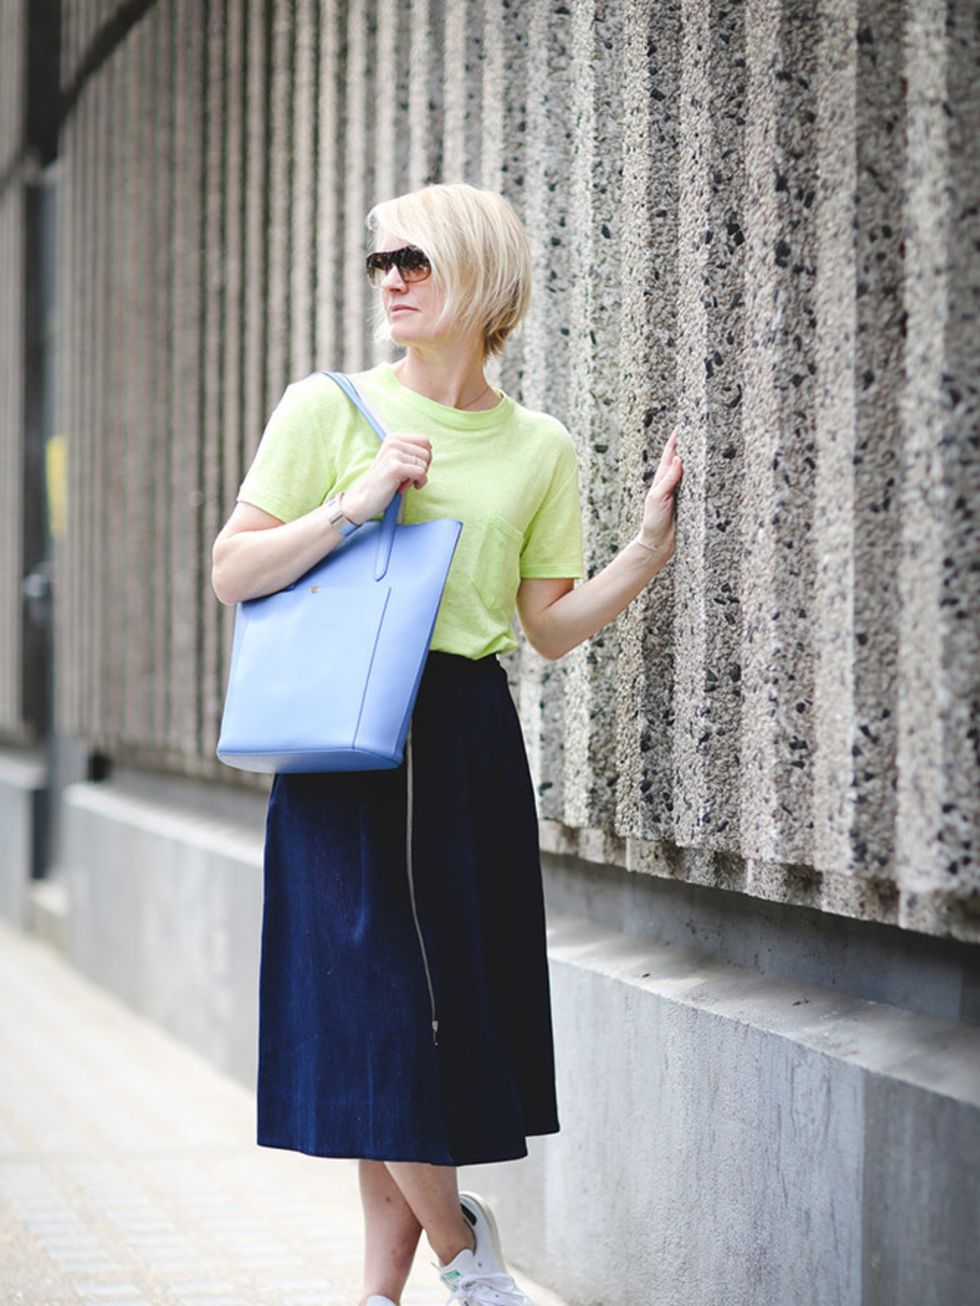 <p>Lorraine Candy, Editor-in-Chief</p>

<p>Whistles T-shirt and skirt, adidas trainers, Bobbi Brown sunglasses, Smythson bag and Gucci watch</p>